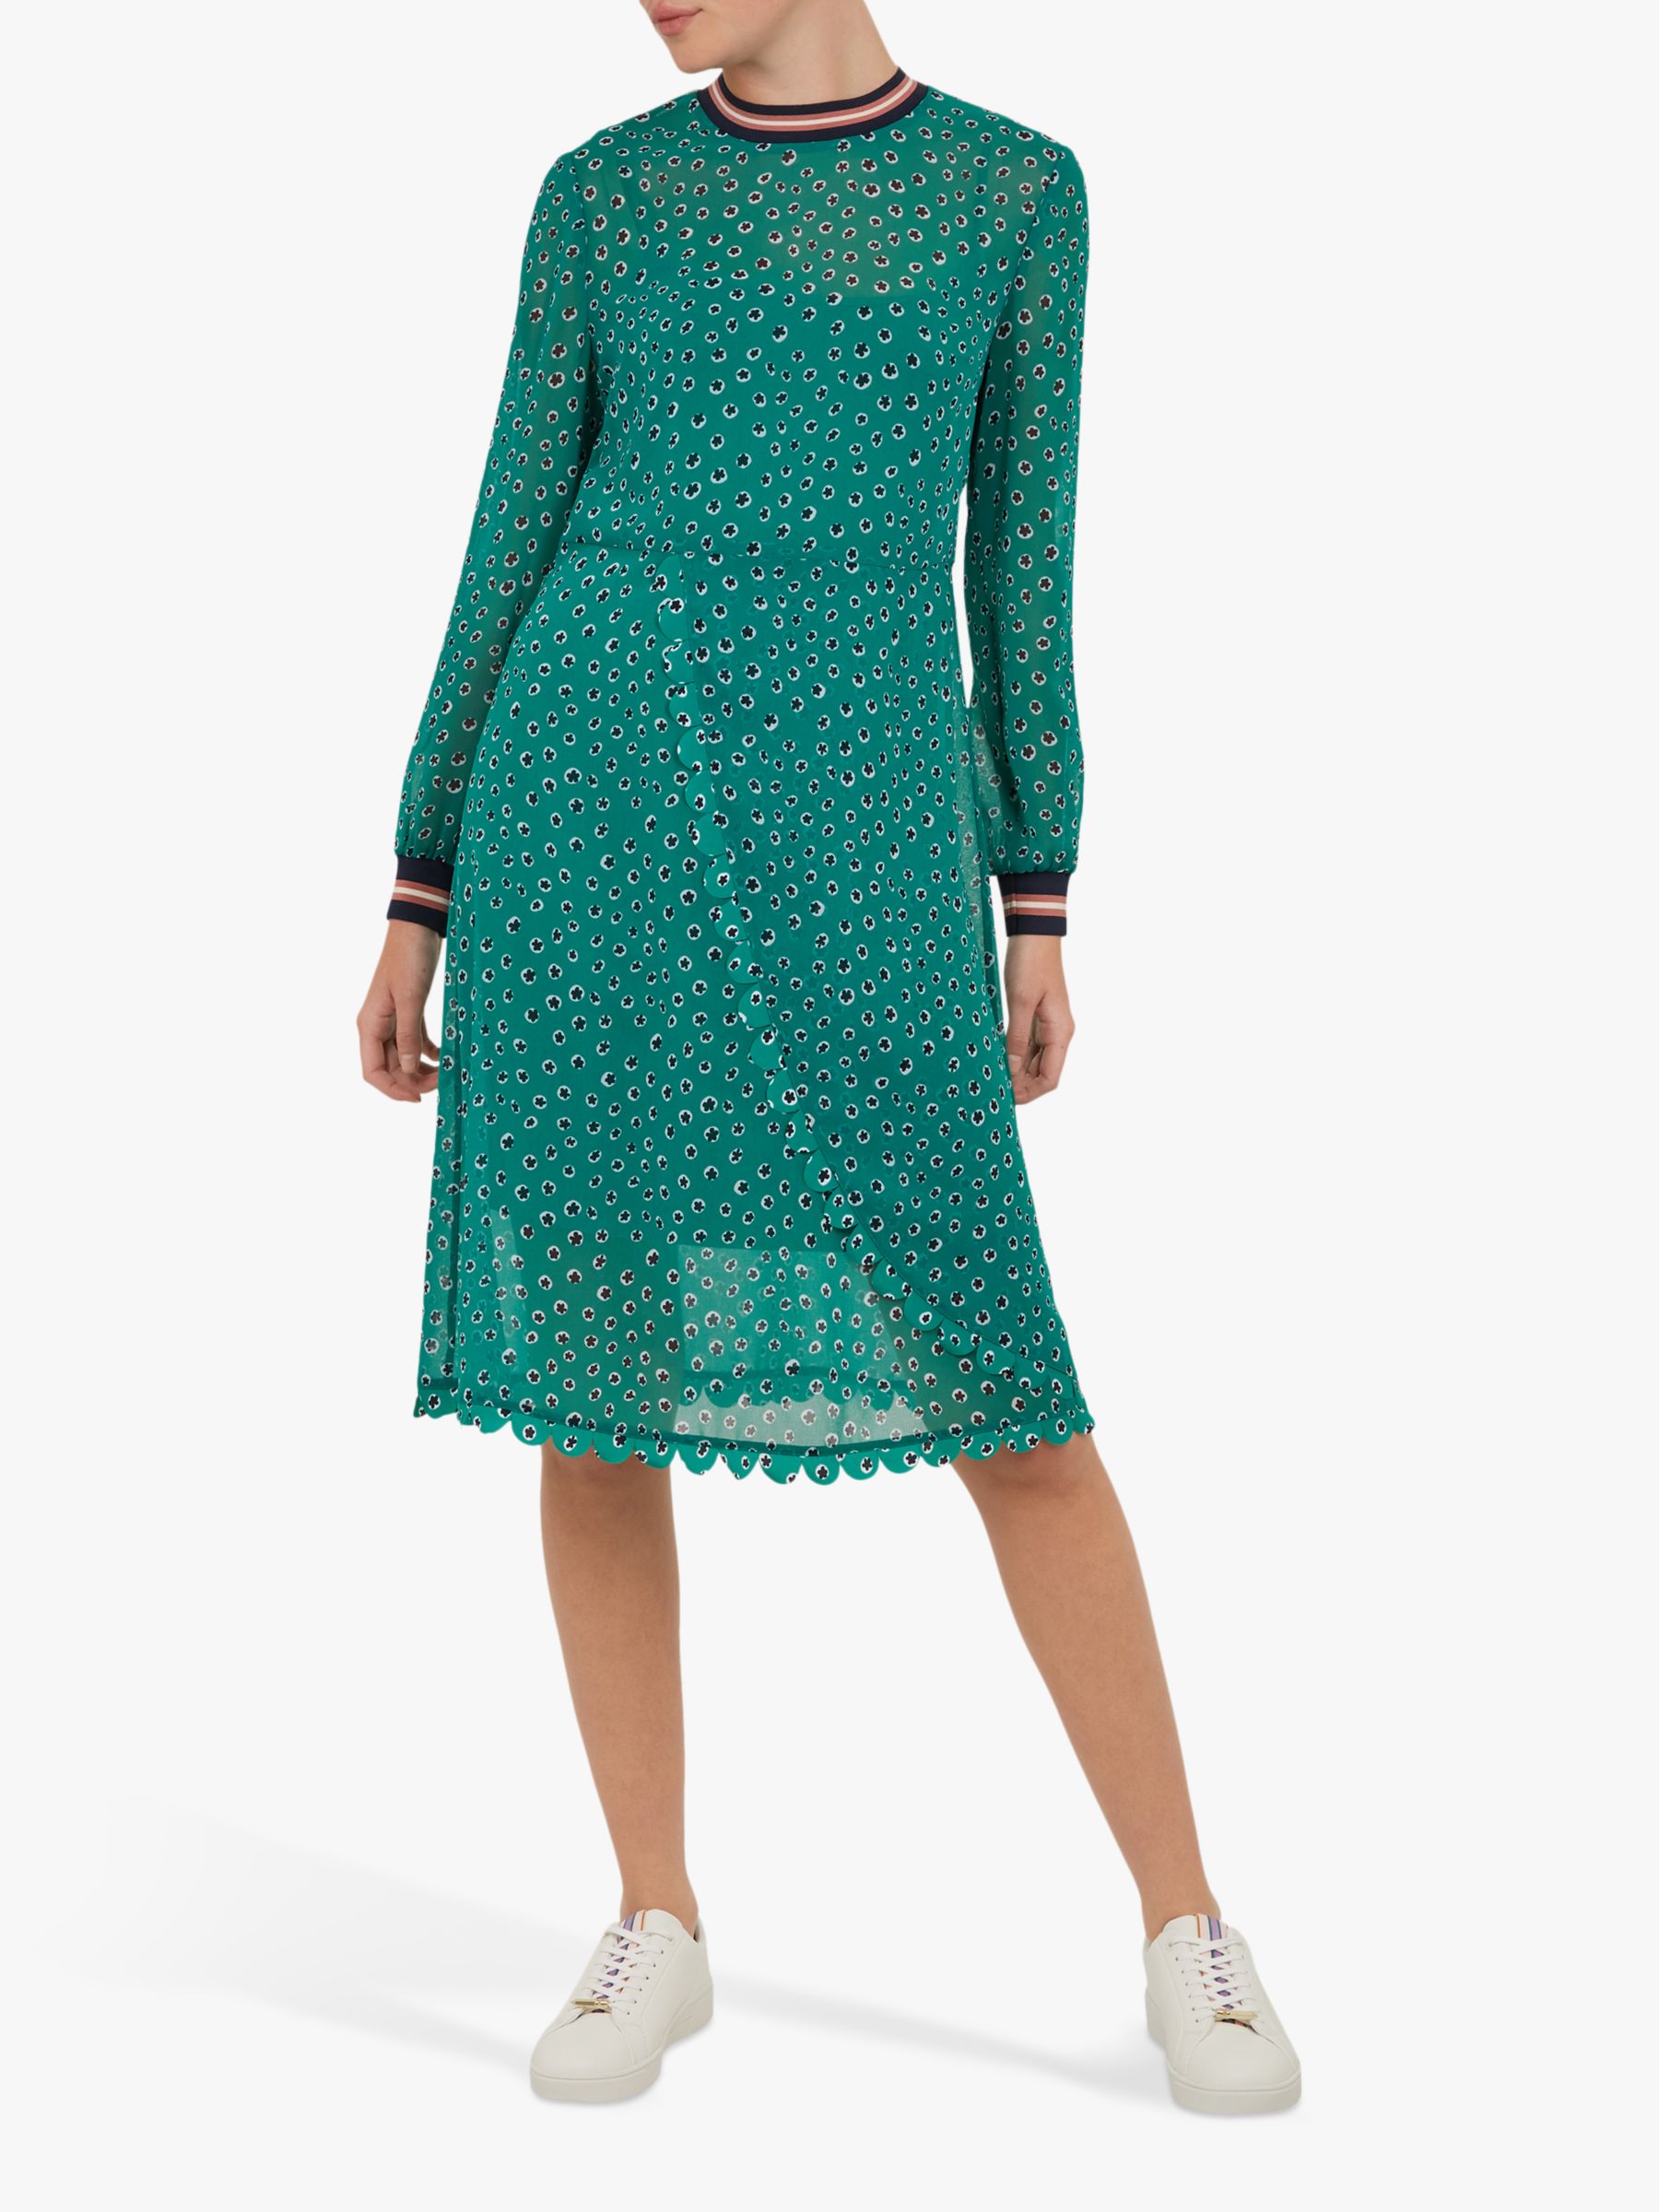 Ted Baker Colour By Numbers Sibella Floral Dot Wrap Dress, Green/Multi